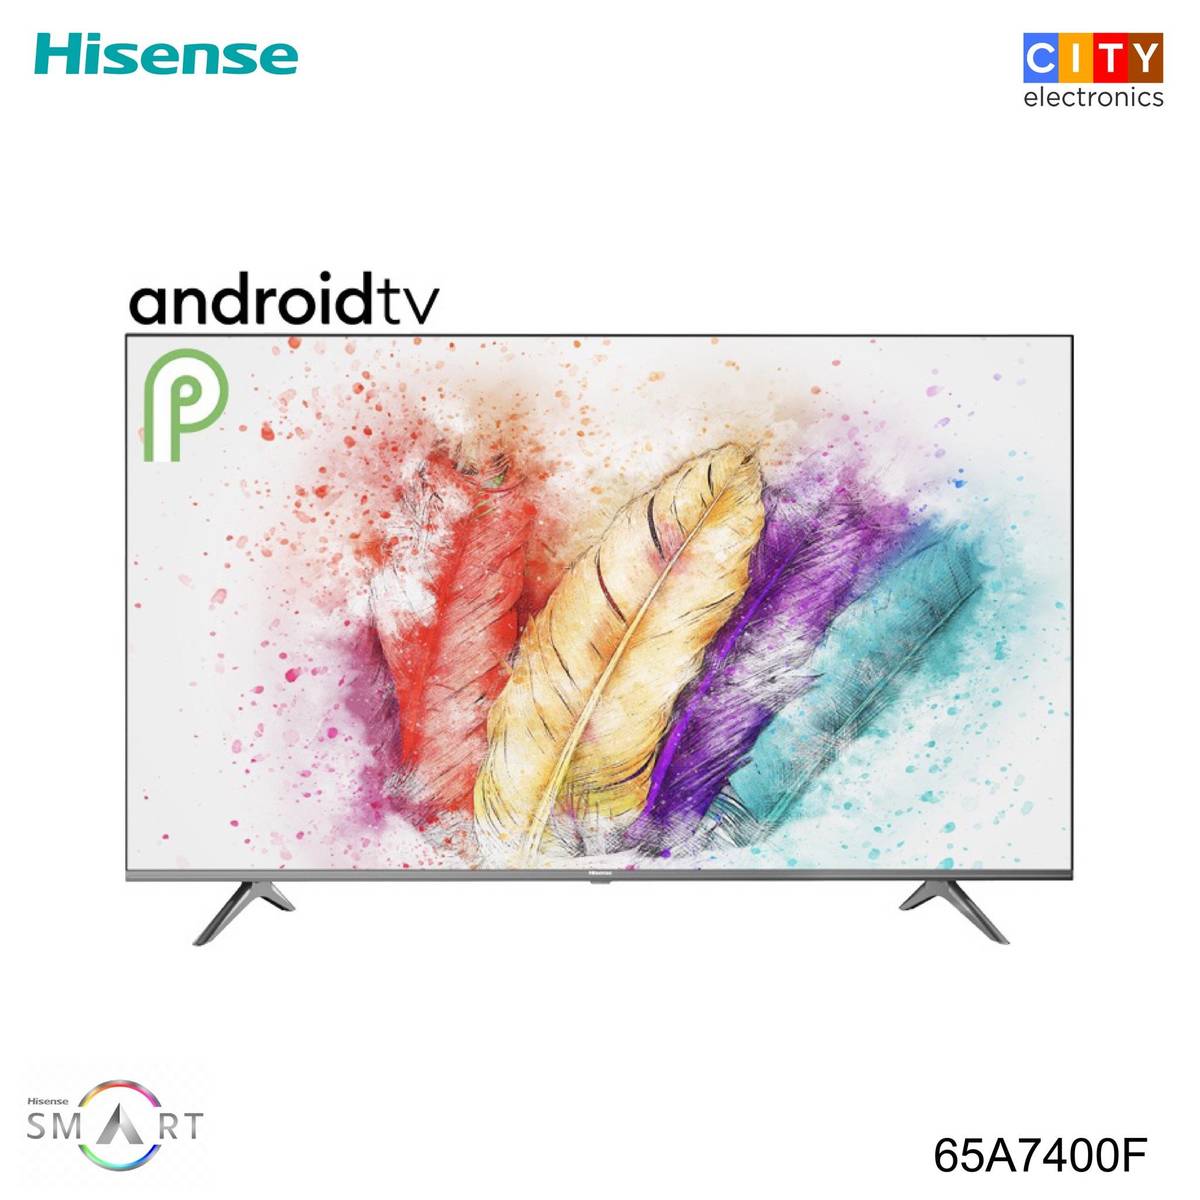 HISENSE 65A7400F  65" 4K UHD Smart Android LED Tv With Google Certified Android 9.0 & Bluetooth Voice Command Remote